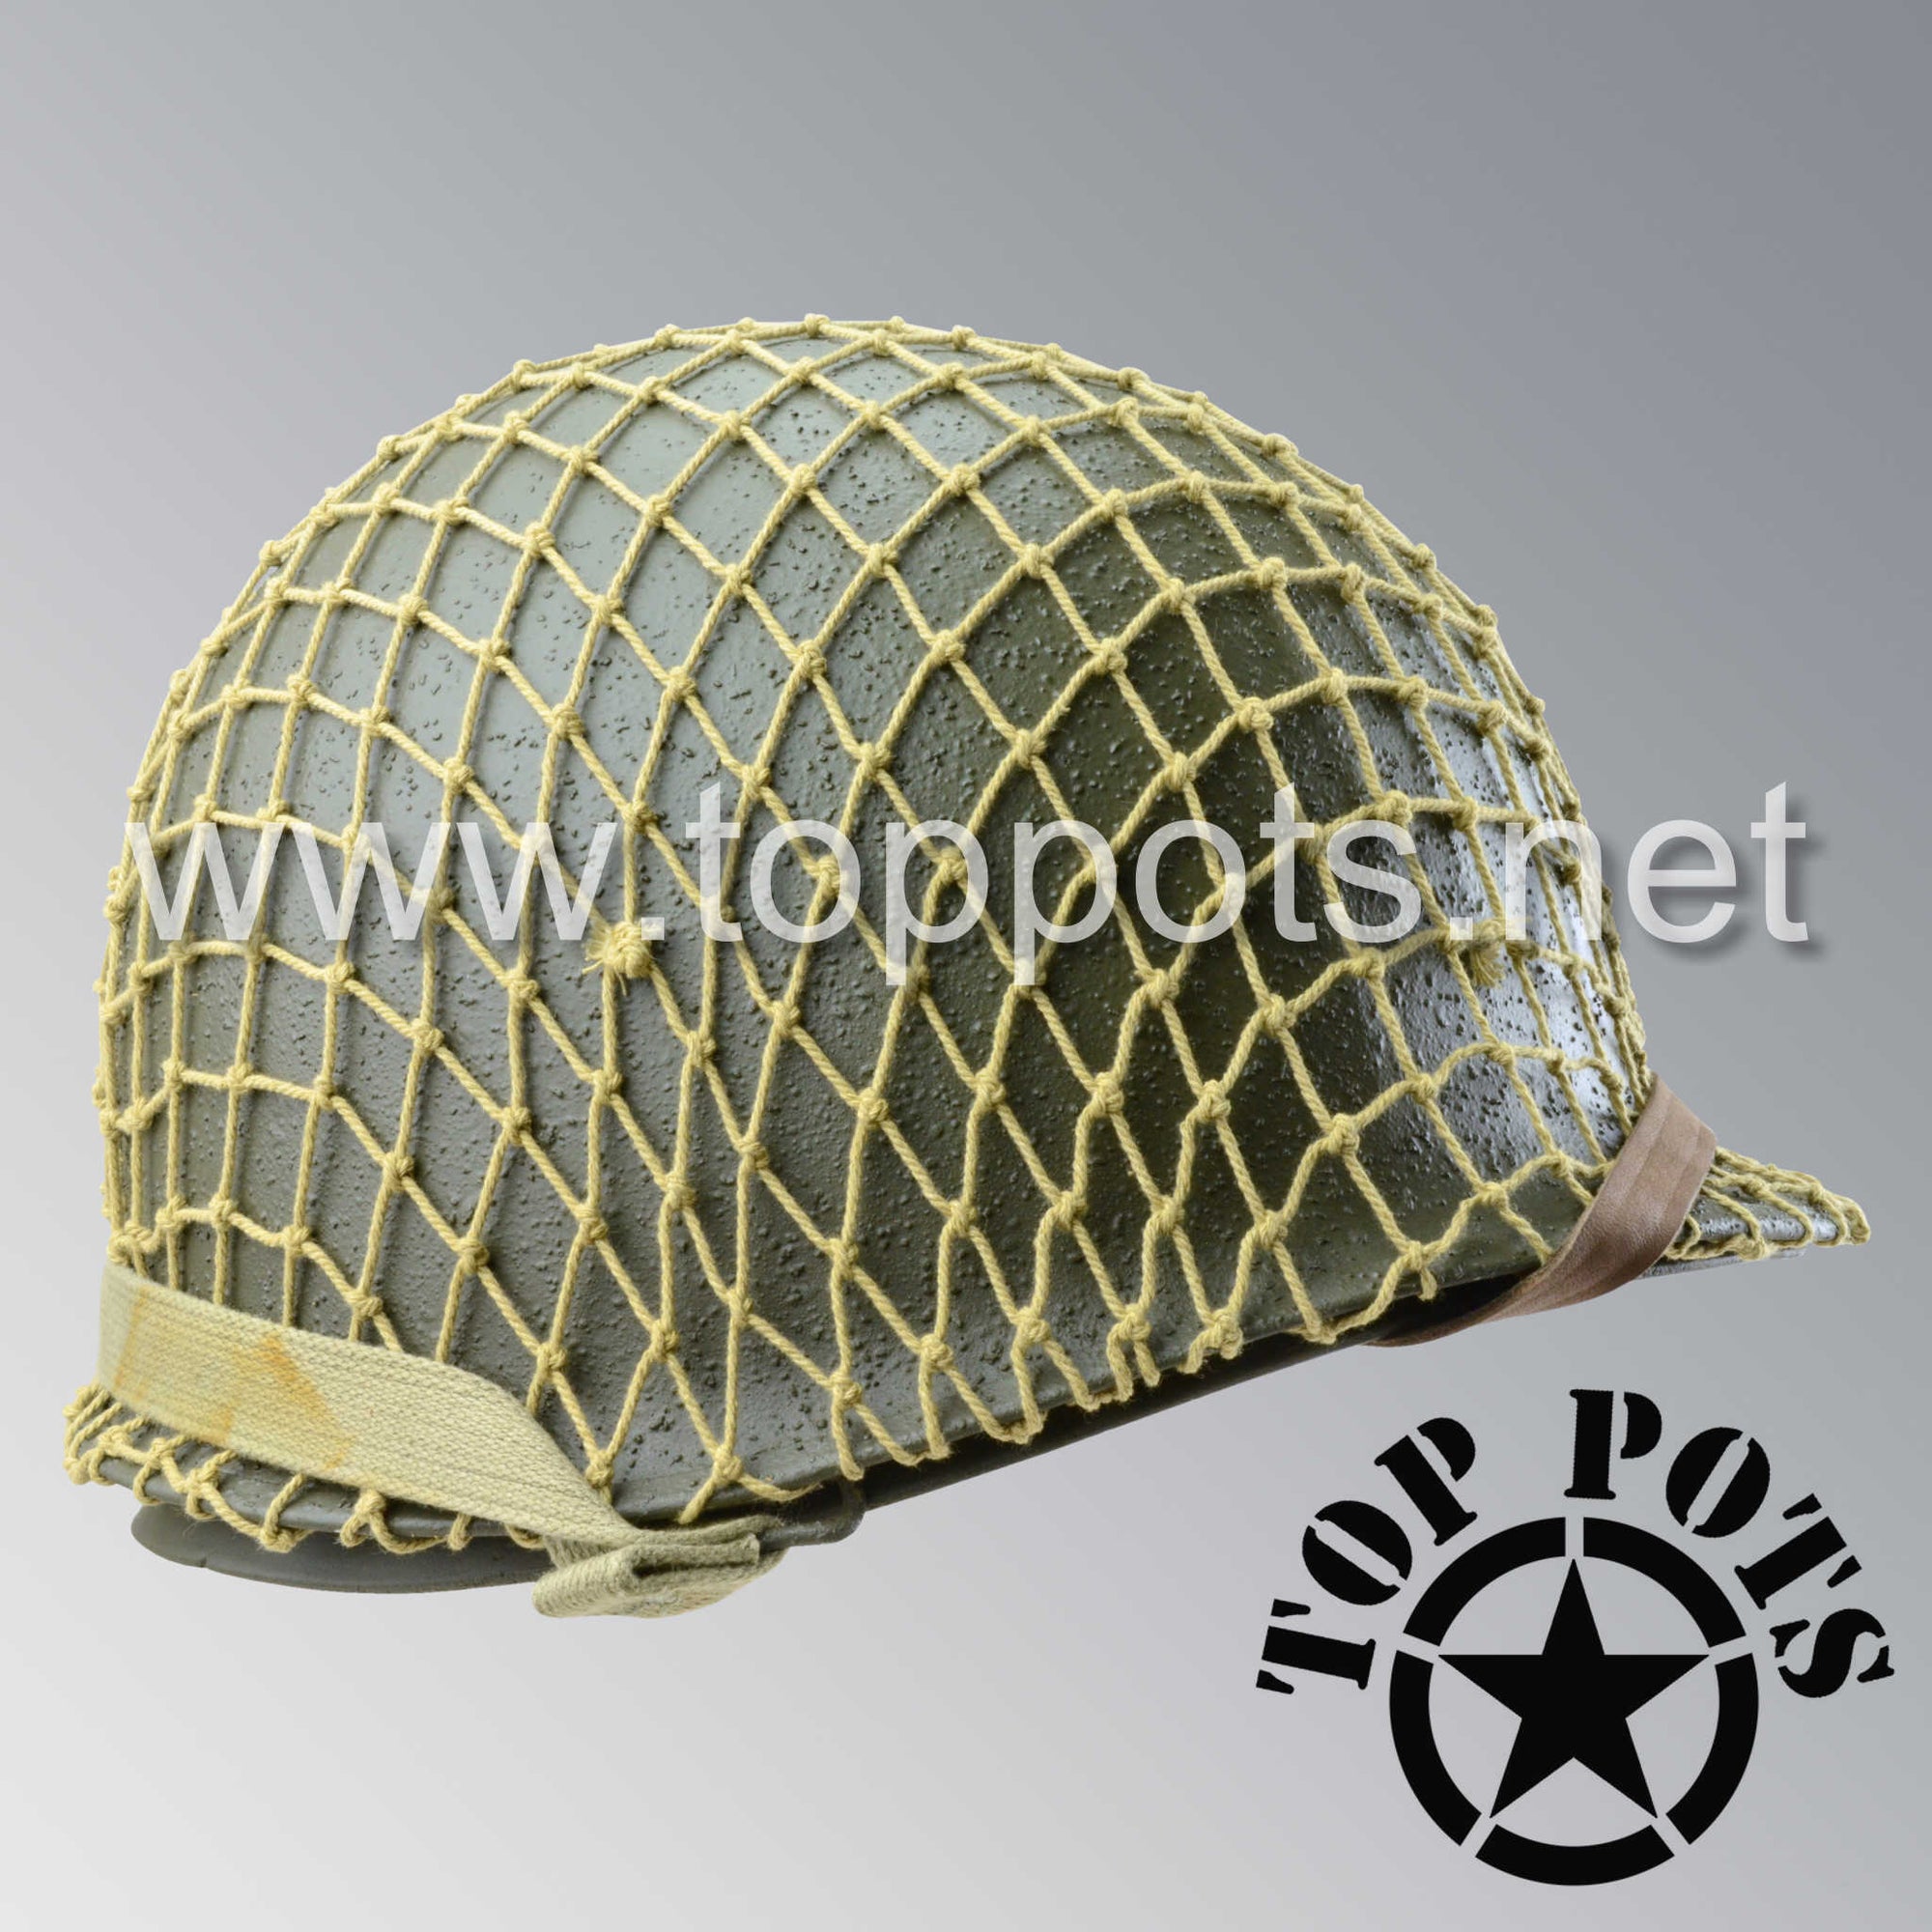 WWII US Army Reproduction M1 Infantry or M1C Paratrooper Airborne Helmet Net - Khaki Tan Cotton (NET ONLY.... HELMET NOT INCLUDED)